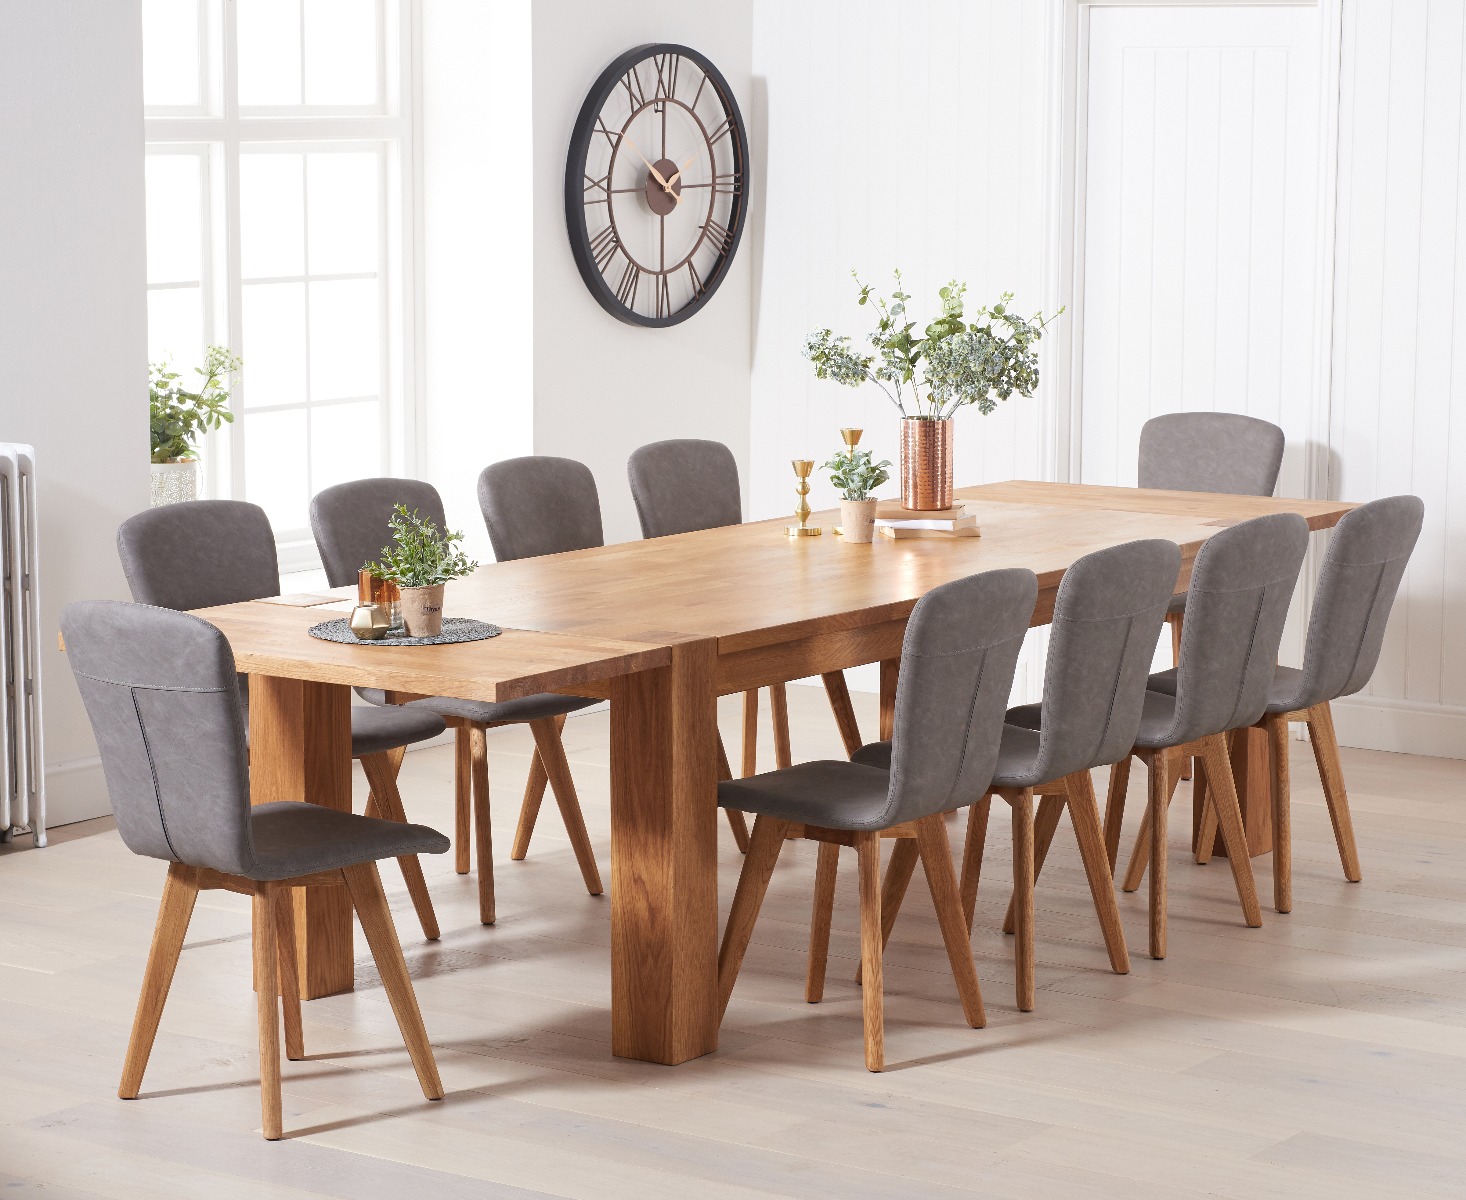 Extending Sheringham 240cm Solid Oak Table With 8 Grey Ruben Faux Leather Chairs